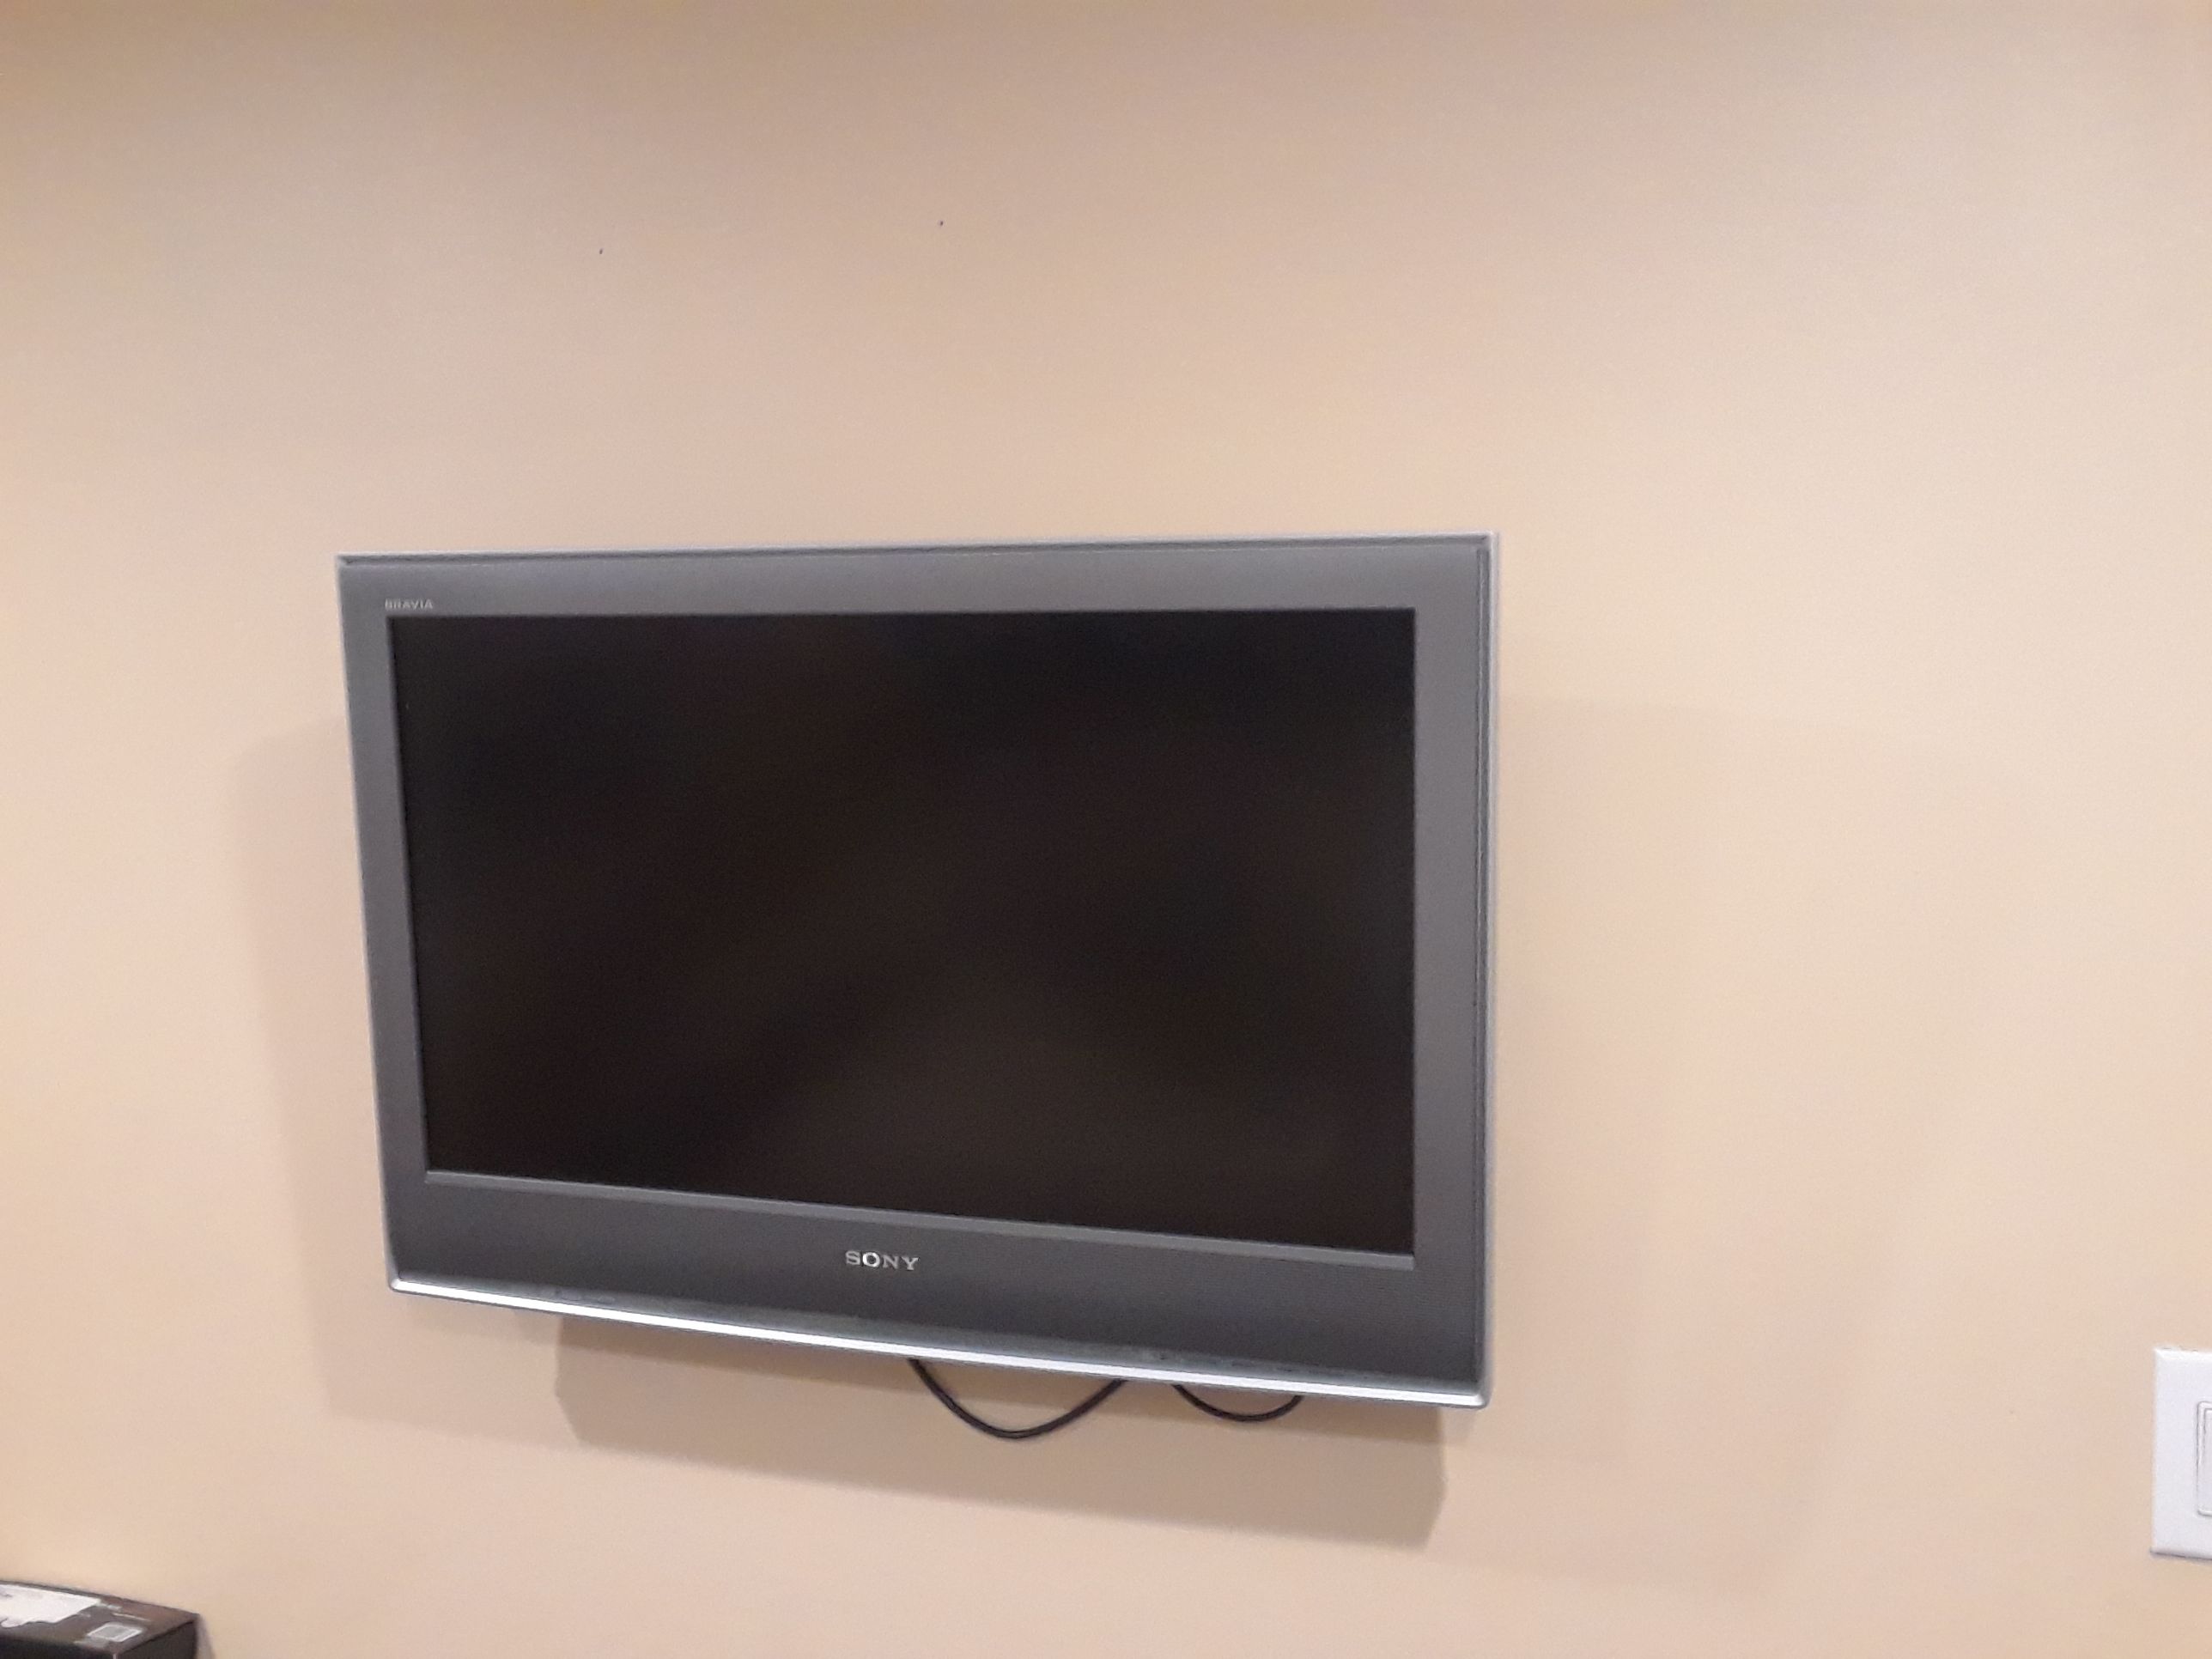 Sony Bravia 32 inch flat screen TV and mount